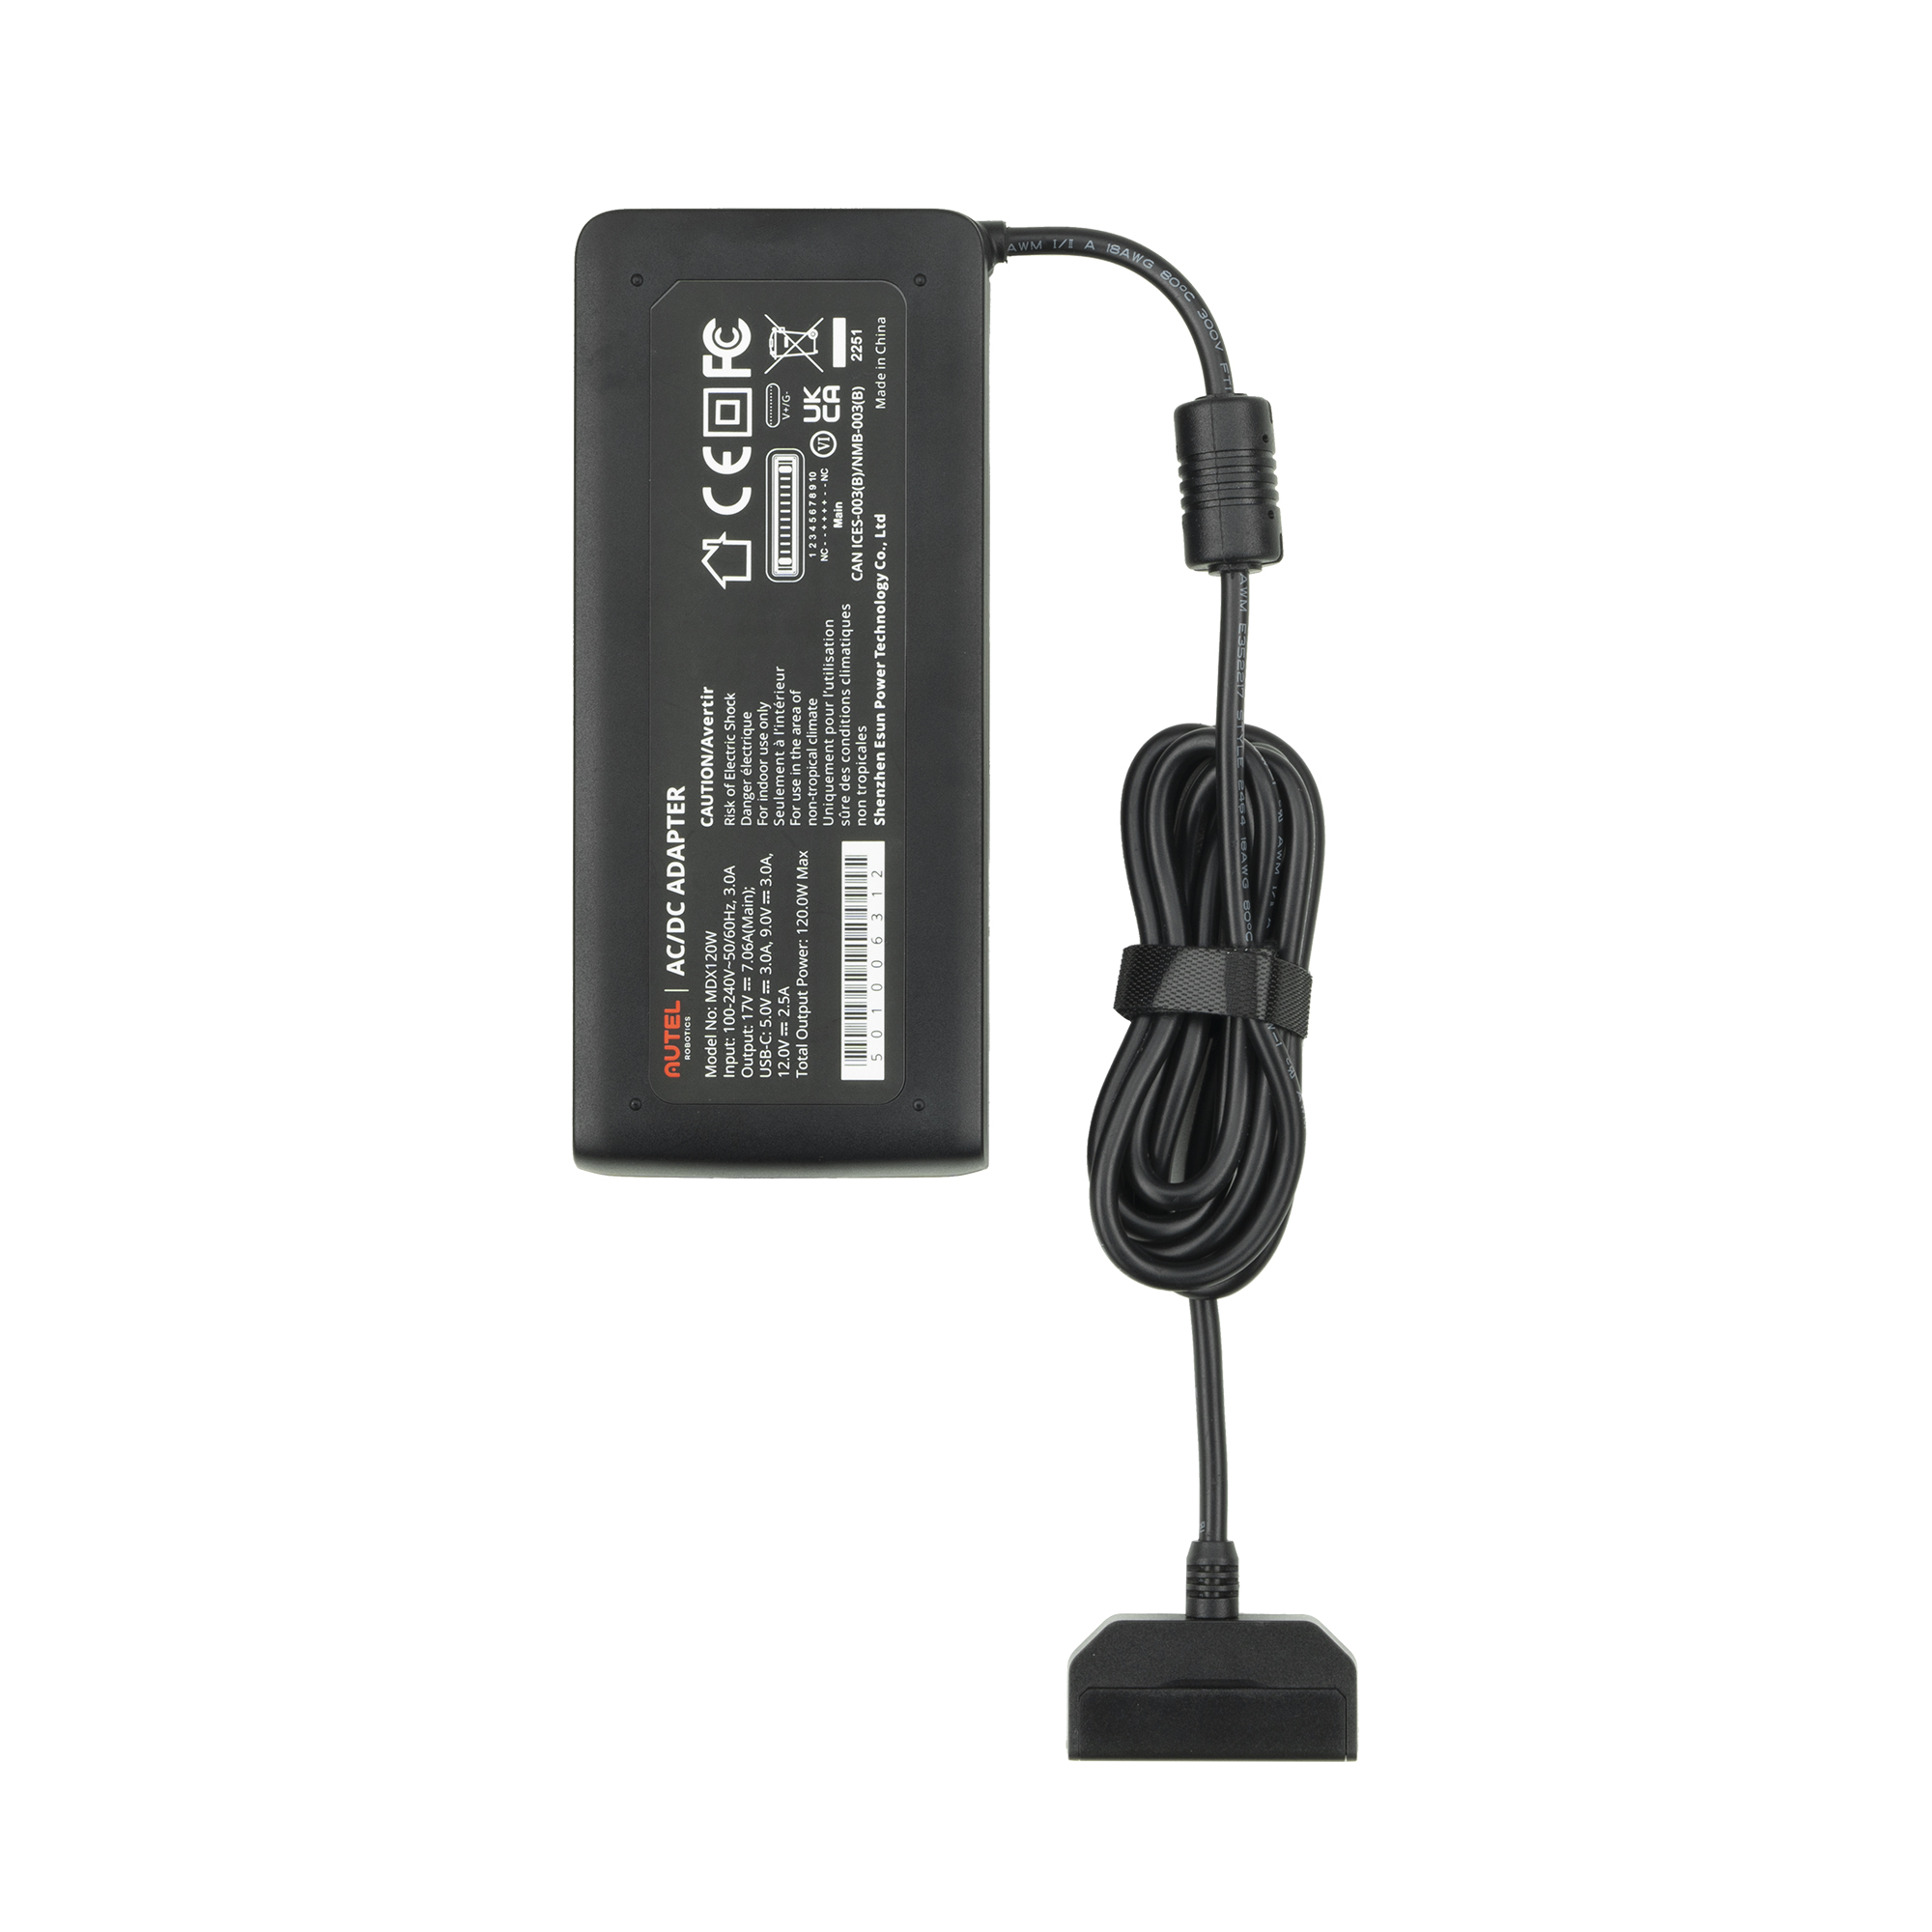 EVO Max 4T_Battery_Charger_003